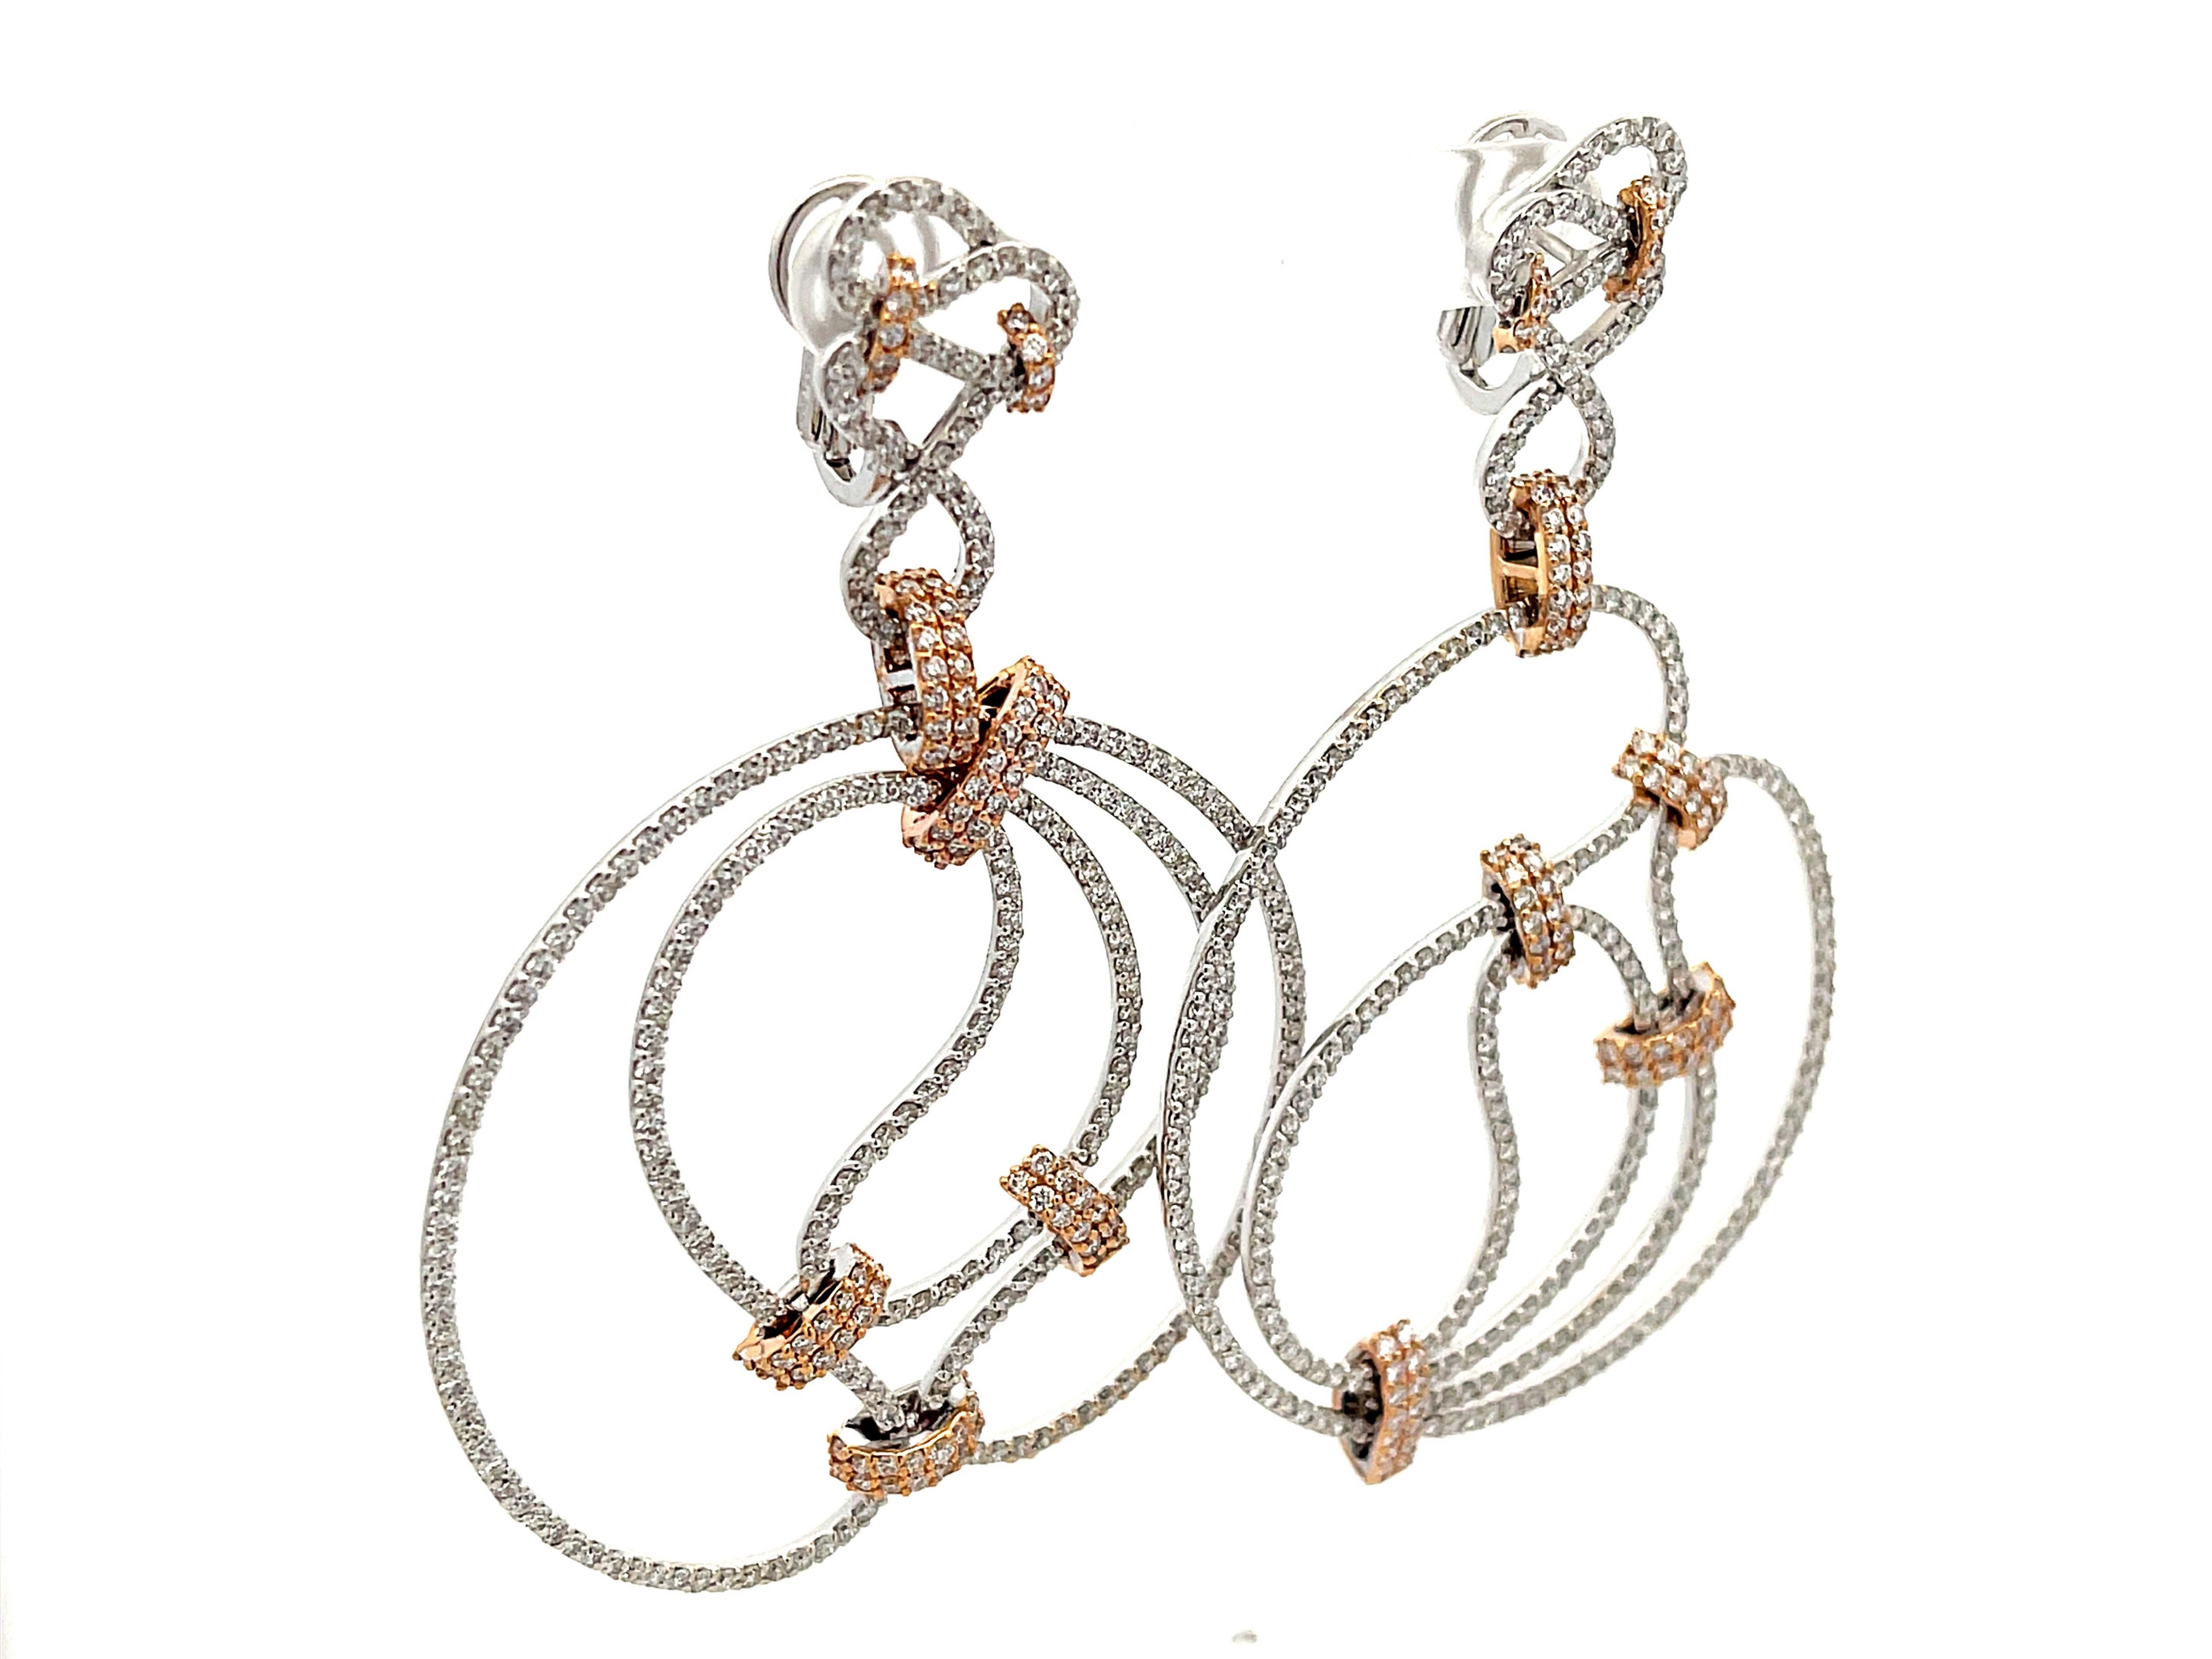 Modern 6.74 Carat Large Diamond Earrings in 18k White Gold with Rose Gold Accents For Sale